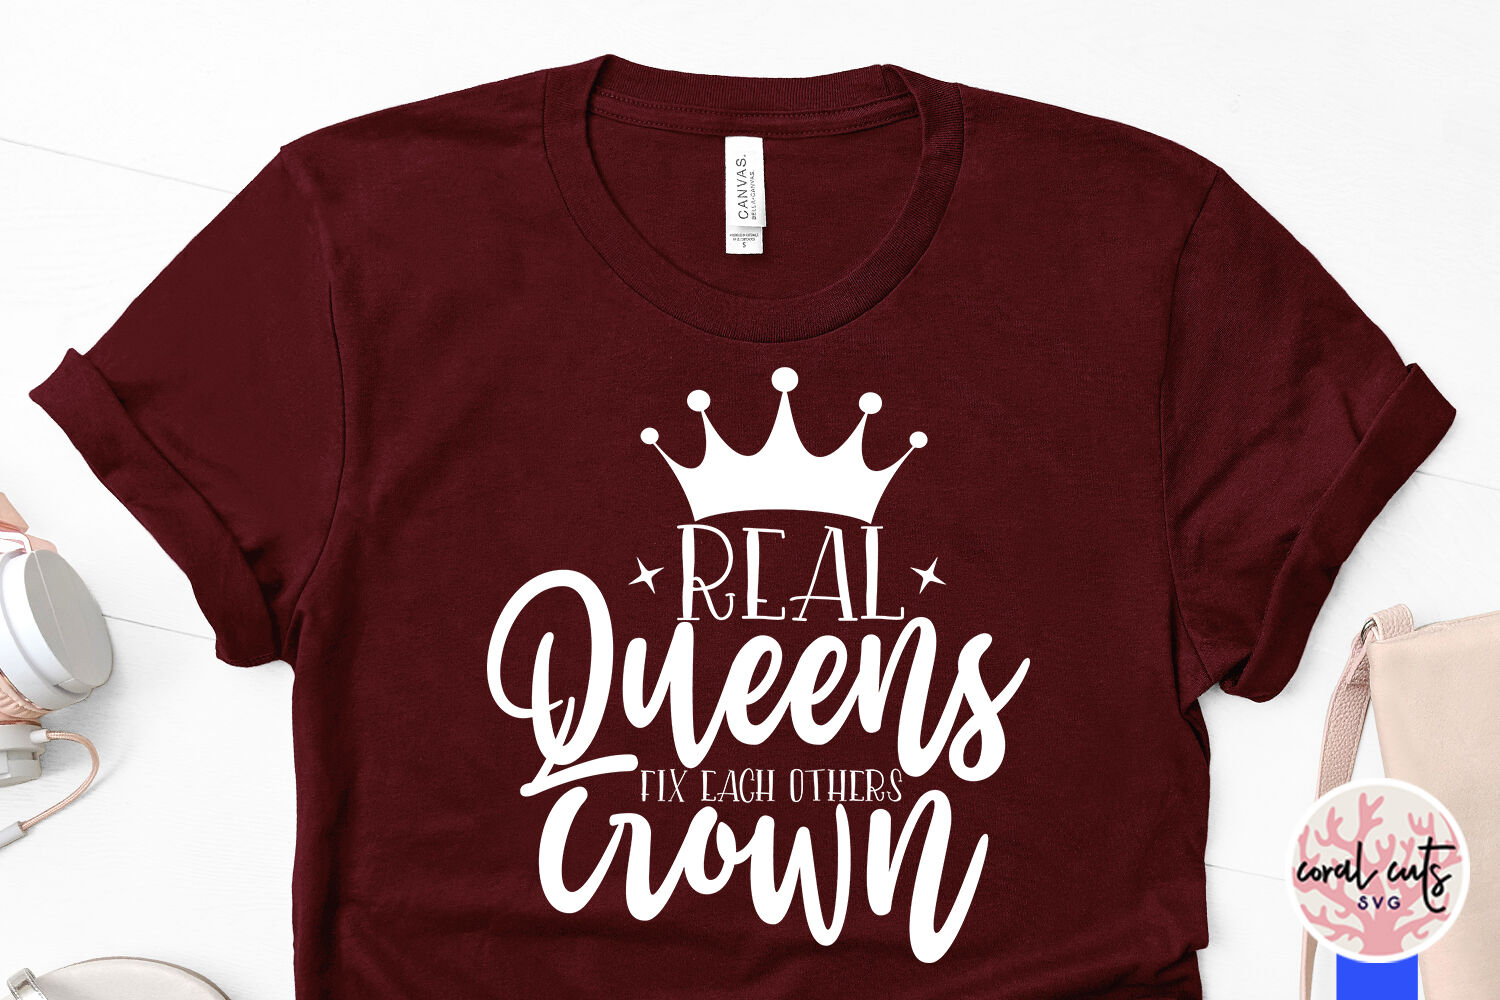 Download Real queens fix each others crown - Women Empowerment SVG ...